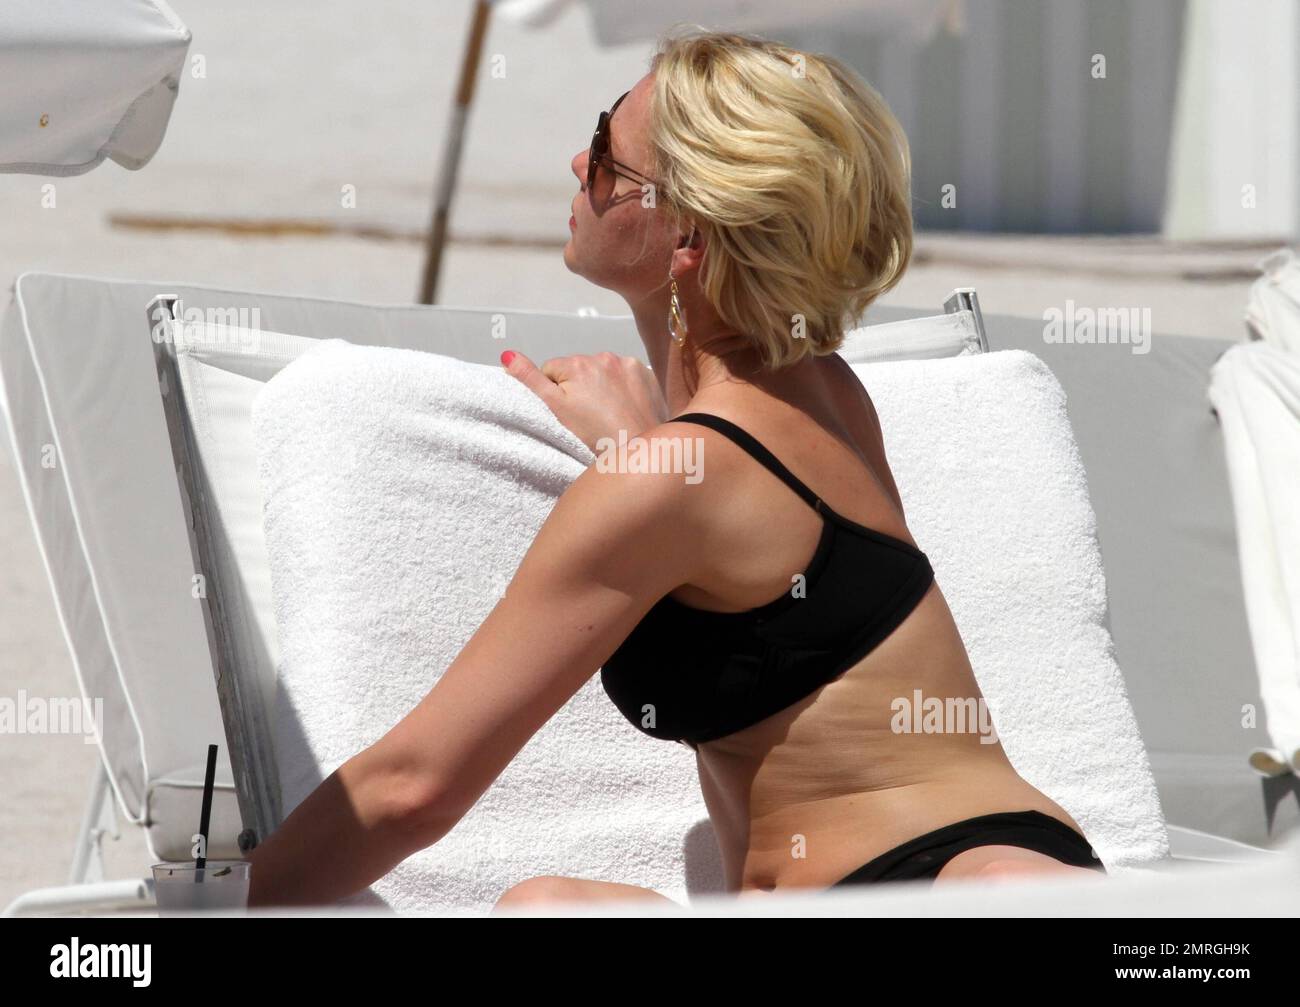 Havoc serve tetrahedron Knocked Up" star Katherine Heigl shows off her slim figure in a black bikini  as she soaks up the sun on Miami Beach. The former "Grey's Anatomy" star  relaxed on a lounge